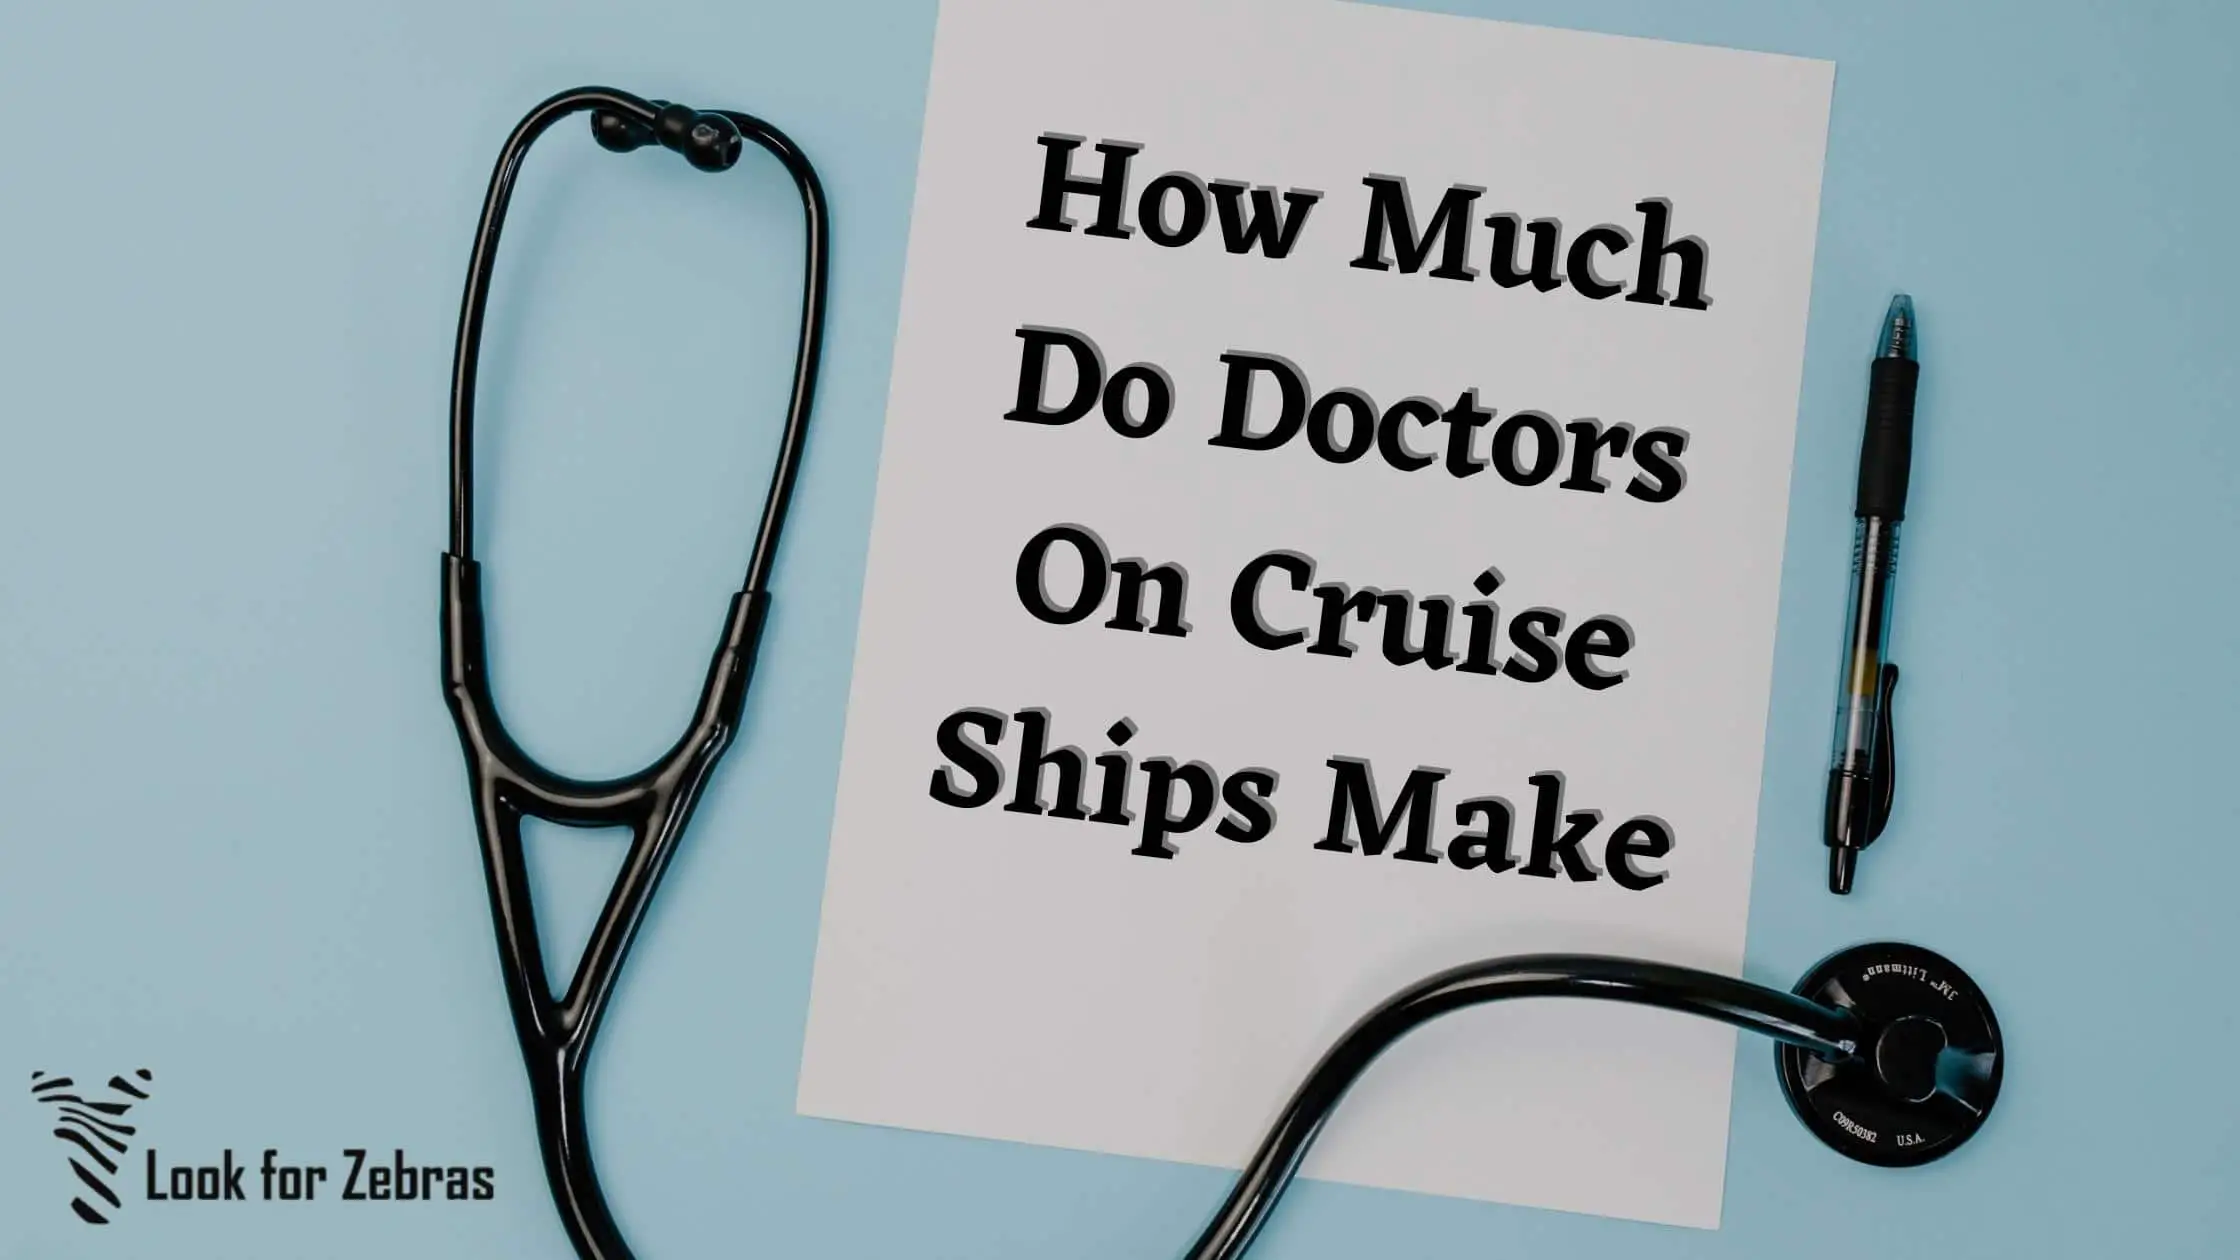 How much do doctors on ship make